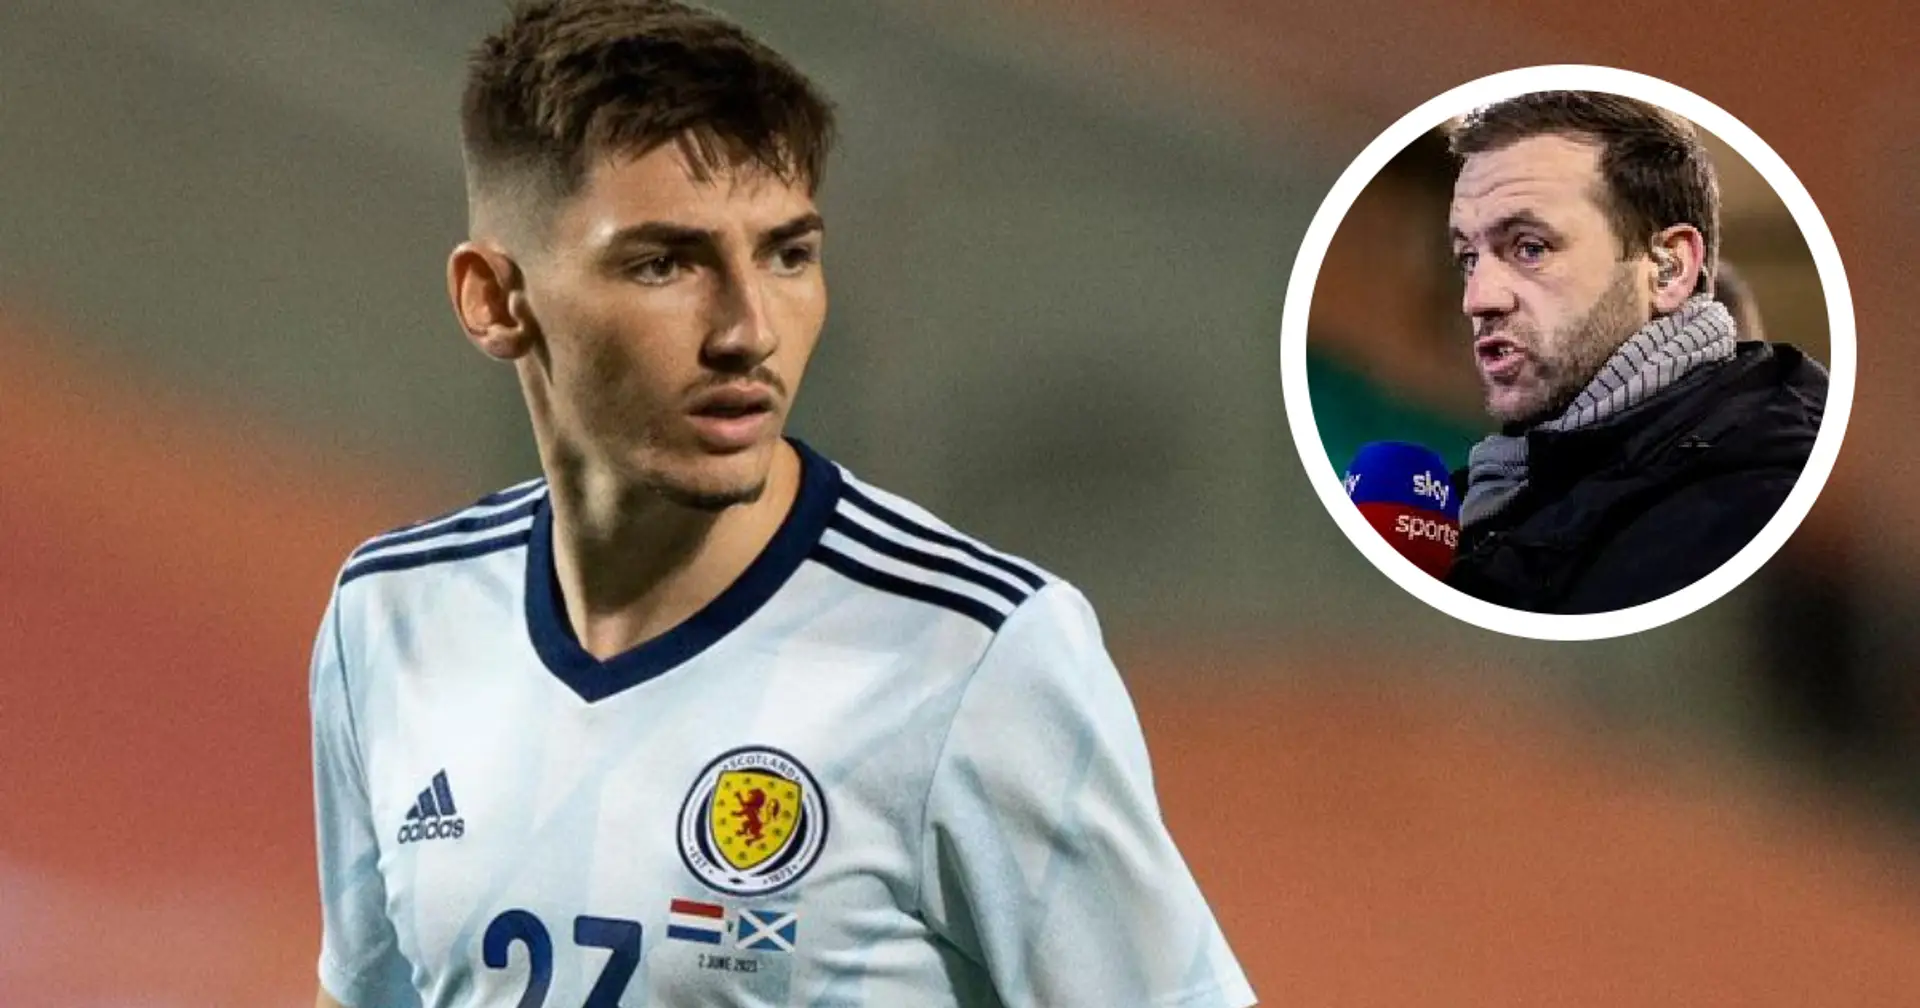 'Magnificent': Ex-PL player McFadden showers Chelsea loanee Gilmour with praise for Scotland performance